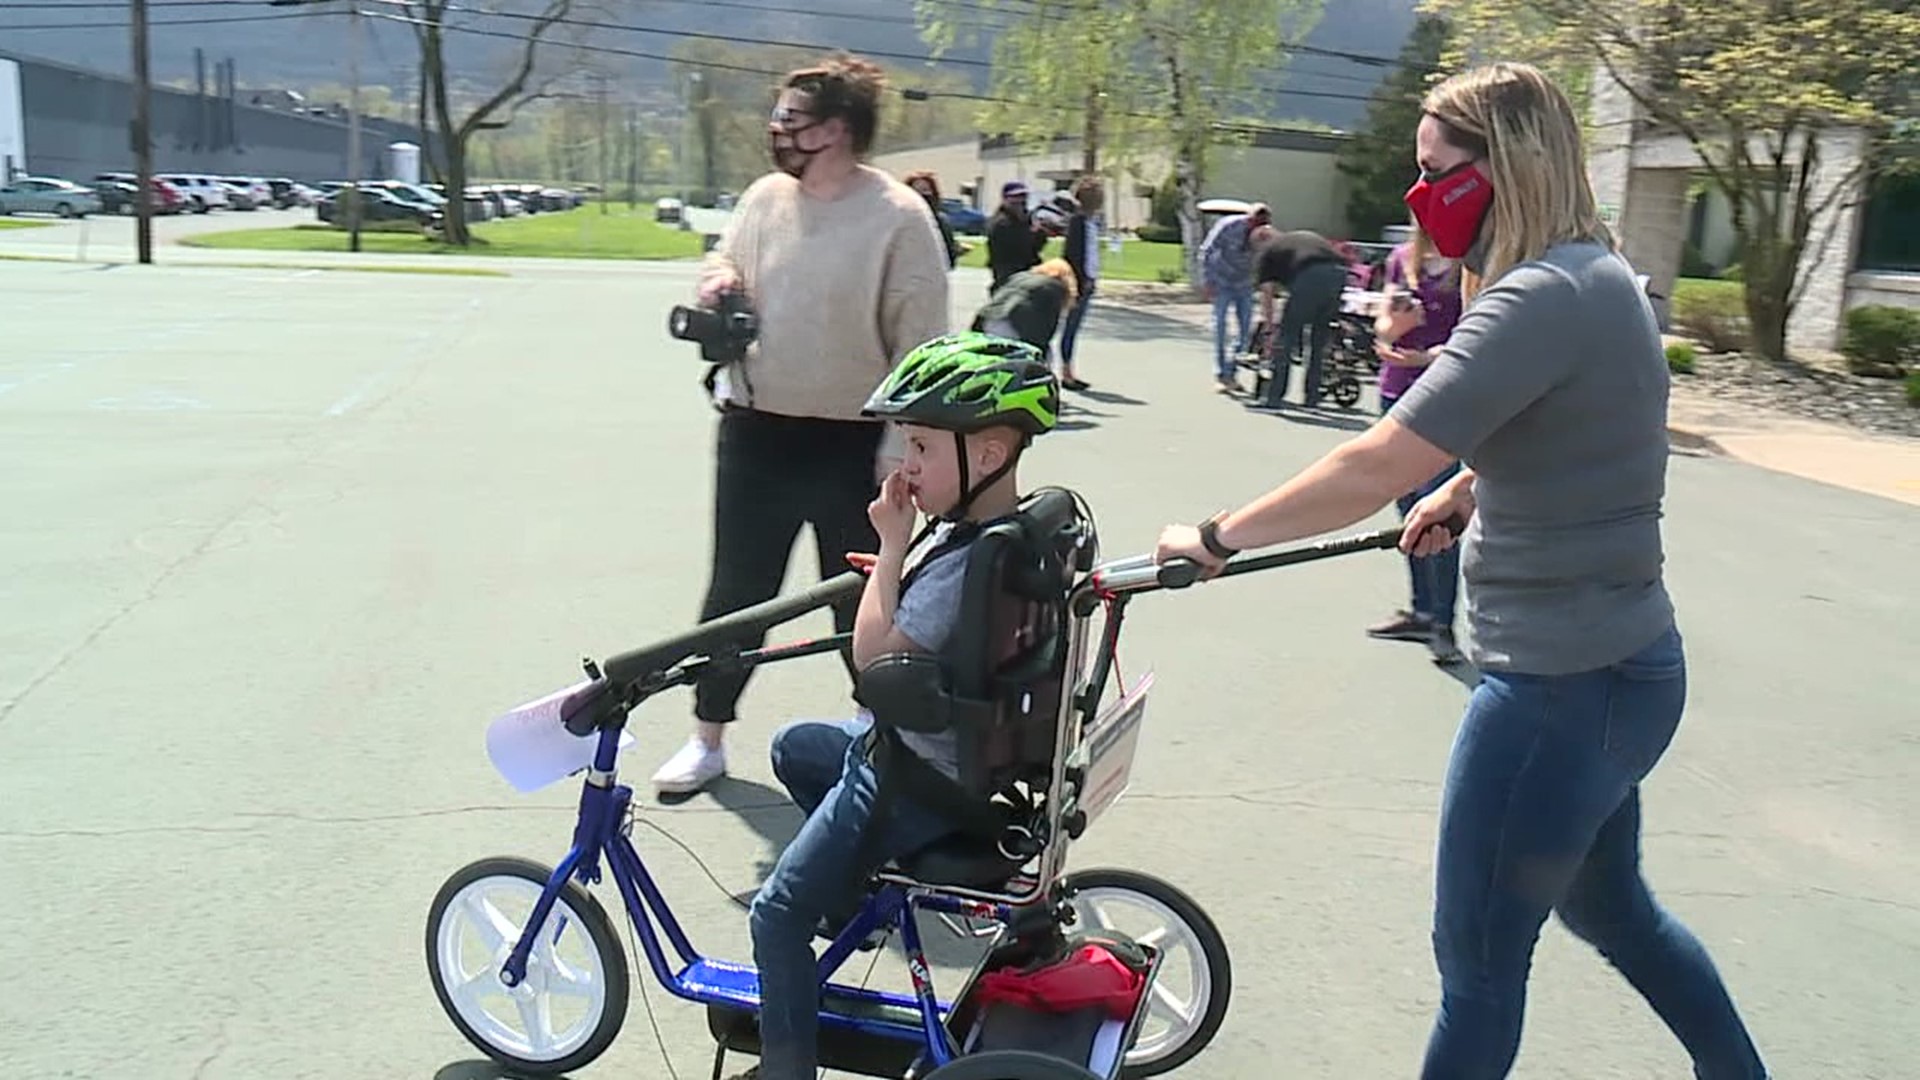 Variety Pittsburgh is providing bikes and strollers to kids with special needs.